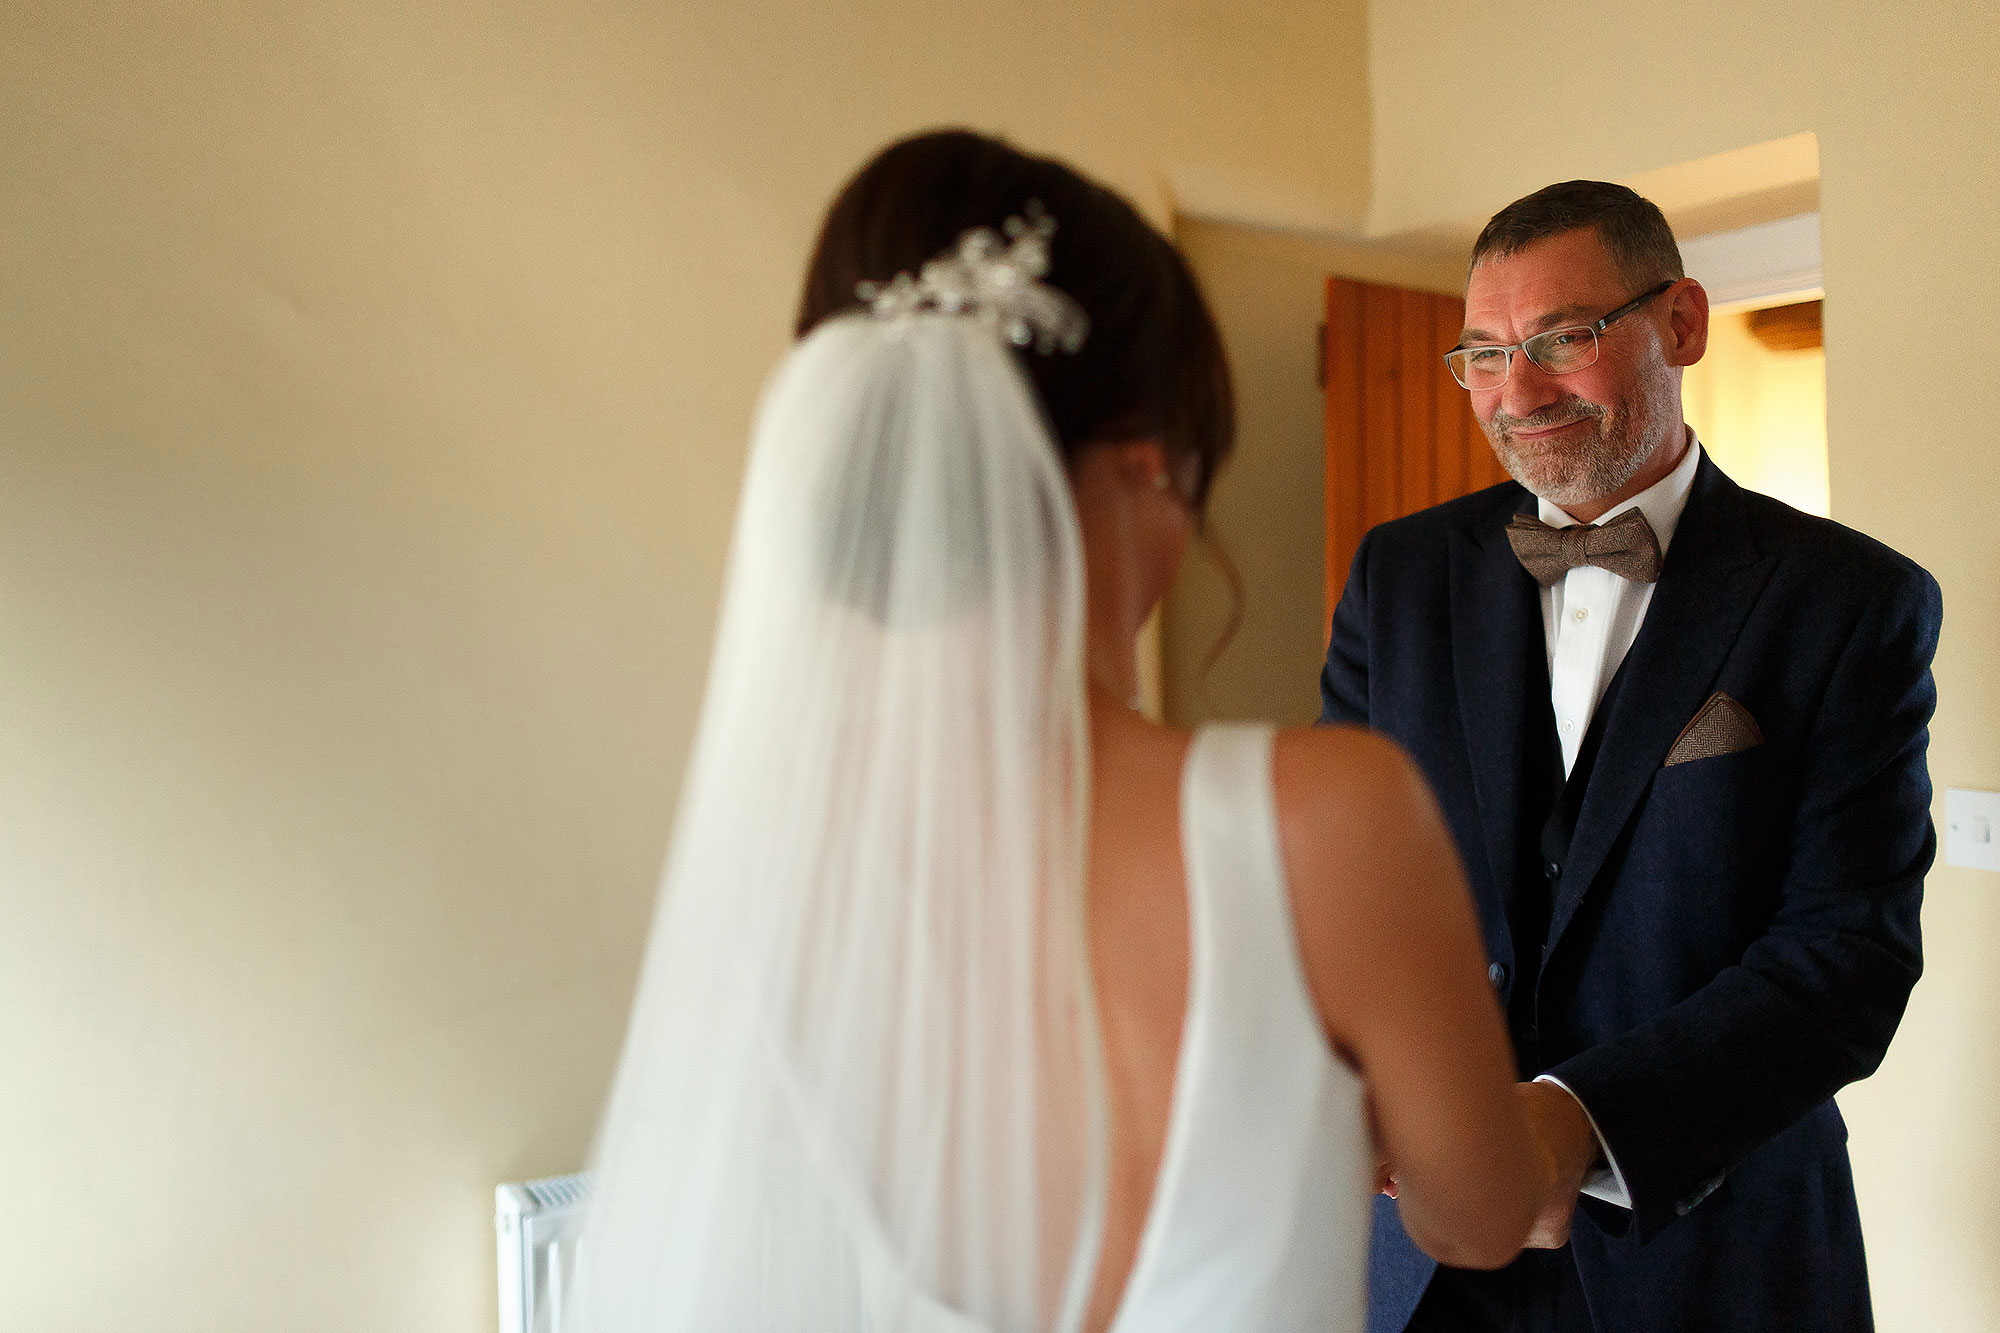 Bride wearing veil holding hands of her father as he sees her in her wedding dress for the first time.